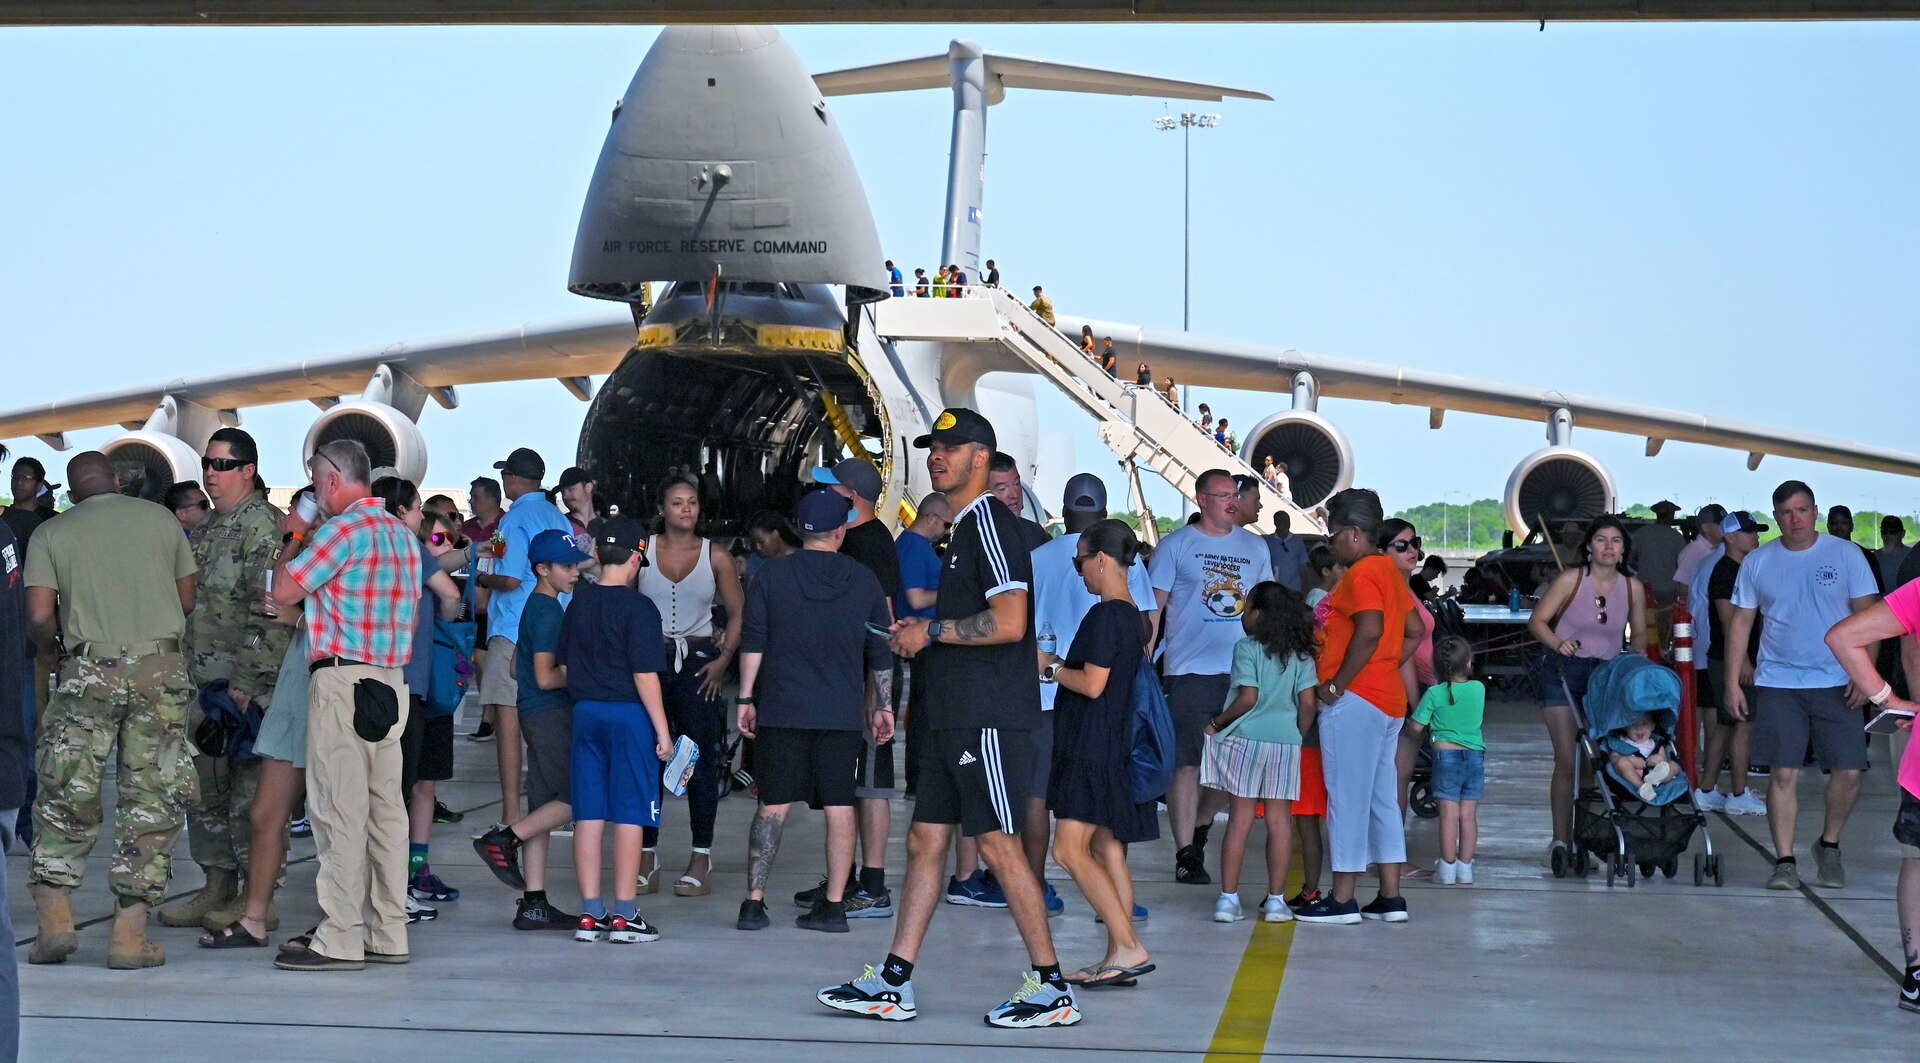 Reserve Citizen Airmen and their families participate in the 2022 433rd Airlift Wing Family Day May 15, 2022, at Joint Base San Antonio-Lackland, Texas. A C-5M Super Galaxy aircraft was opened for public display during the event. (U.S. Air Force photo by Master Sgt. Samantha Mathison)